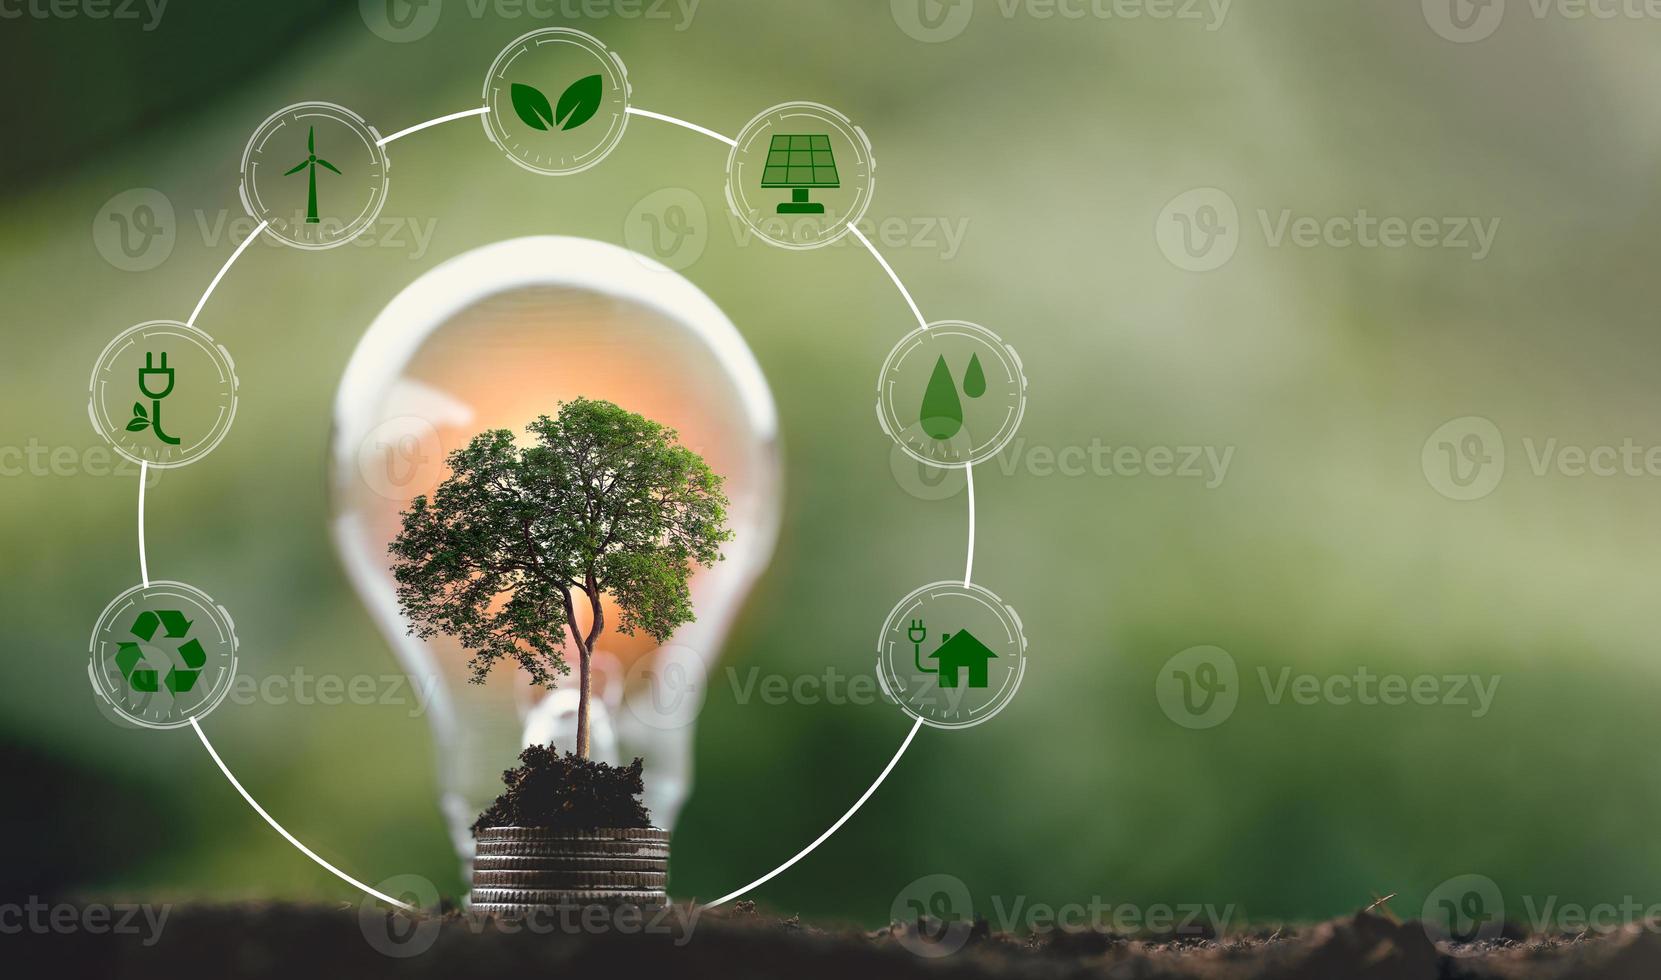 alternative energy, Renewable Energy, saving energy and finance, energy stock investment, lightbulb on coin with eco environment icon. electricity energy source for eco environment. photo